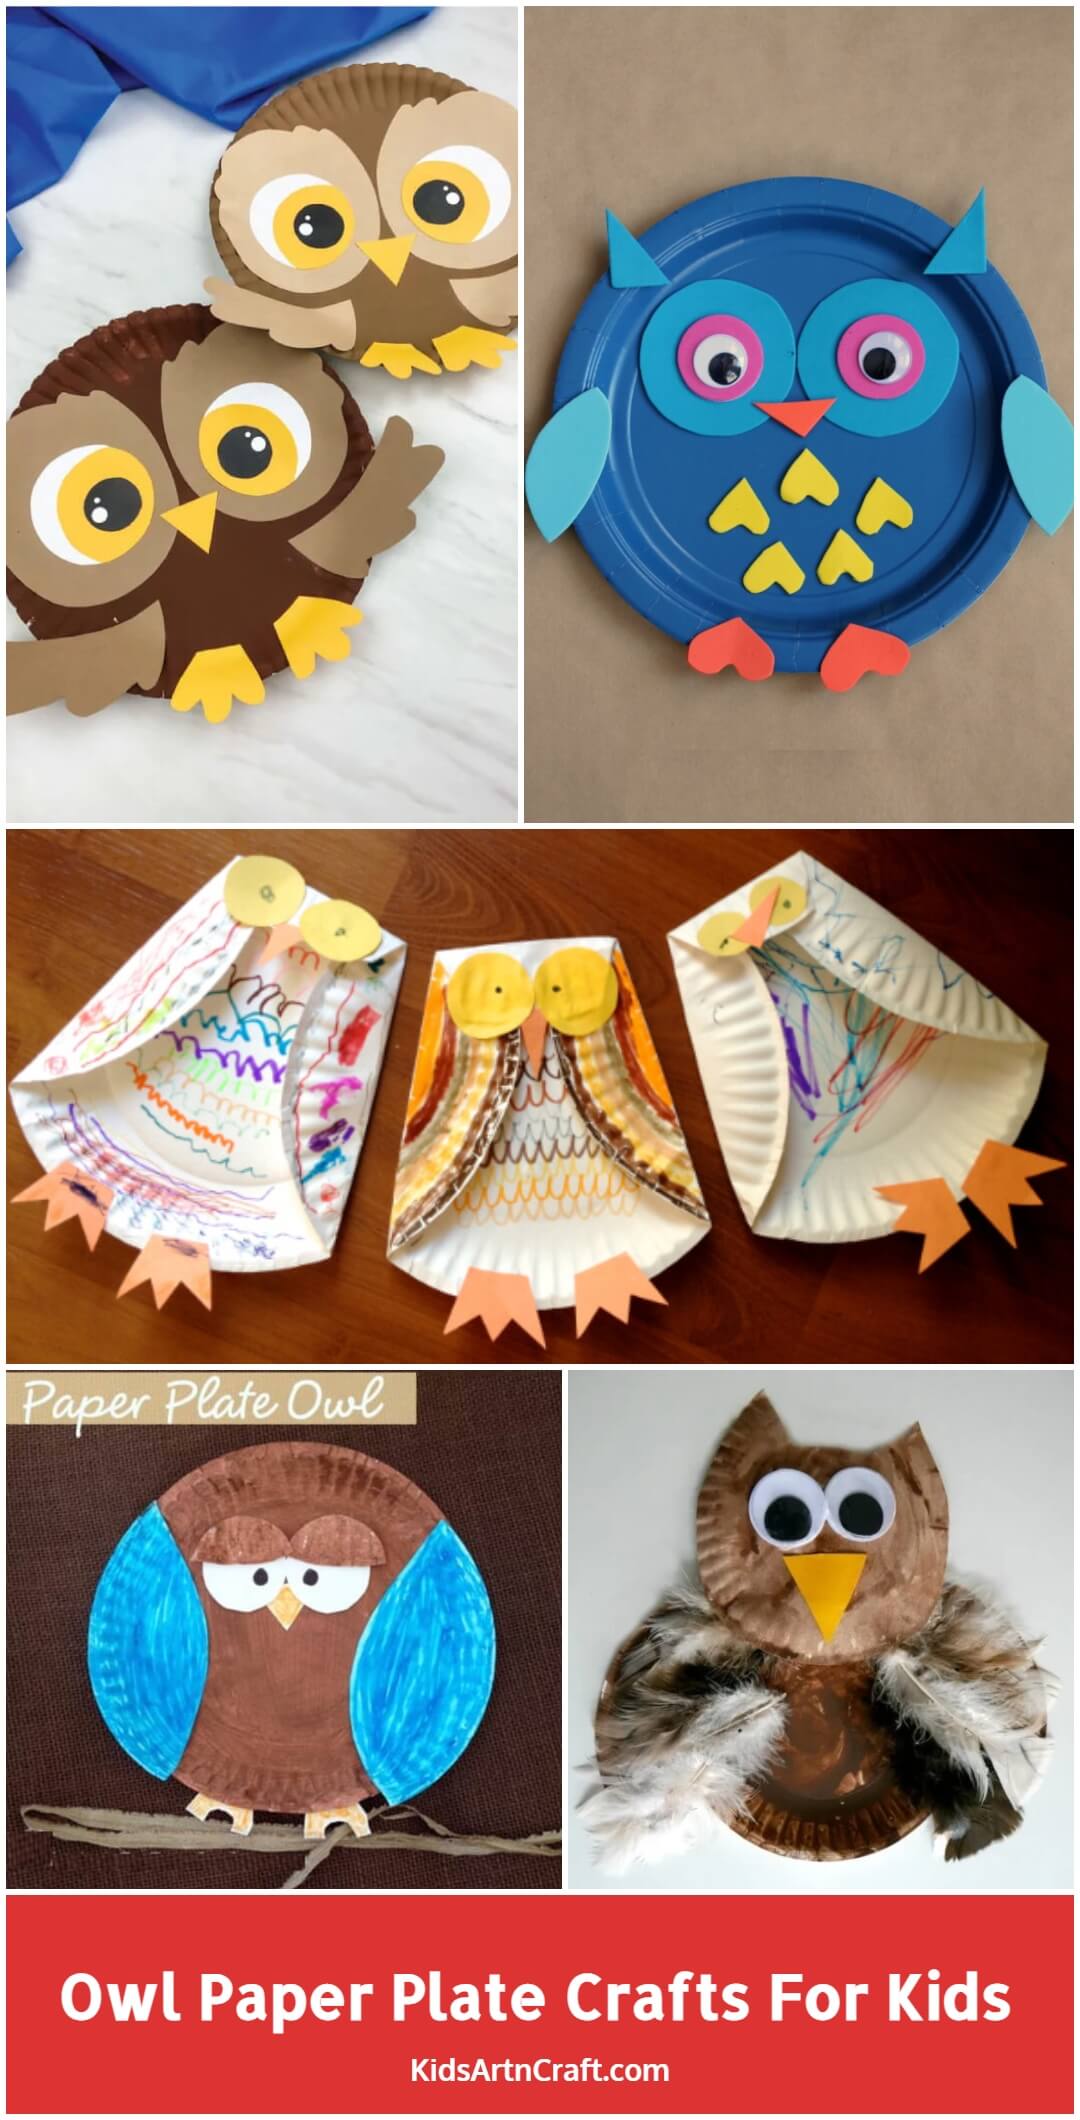 Owl Paper Plate Crafts for Kids